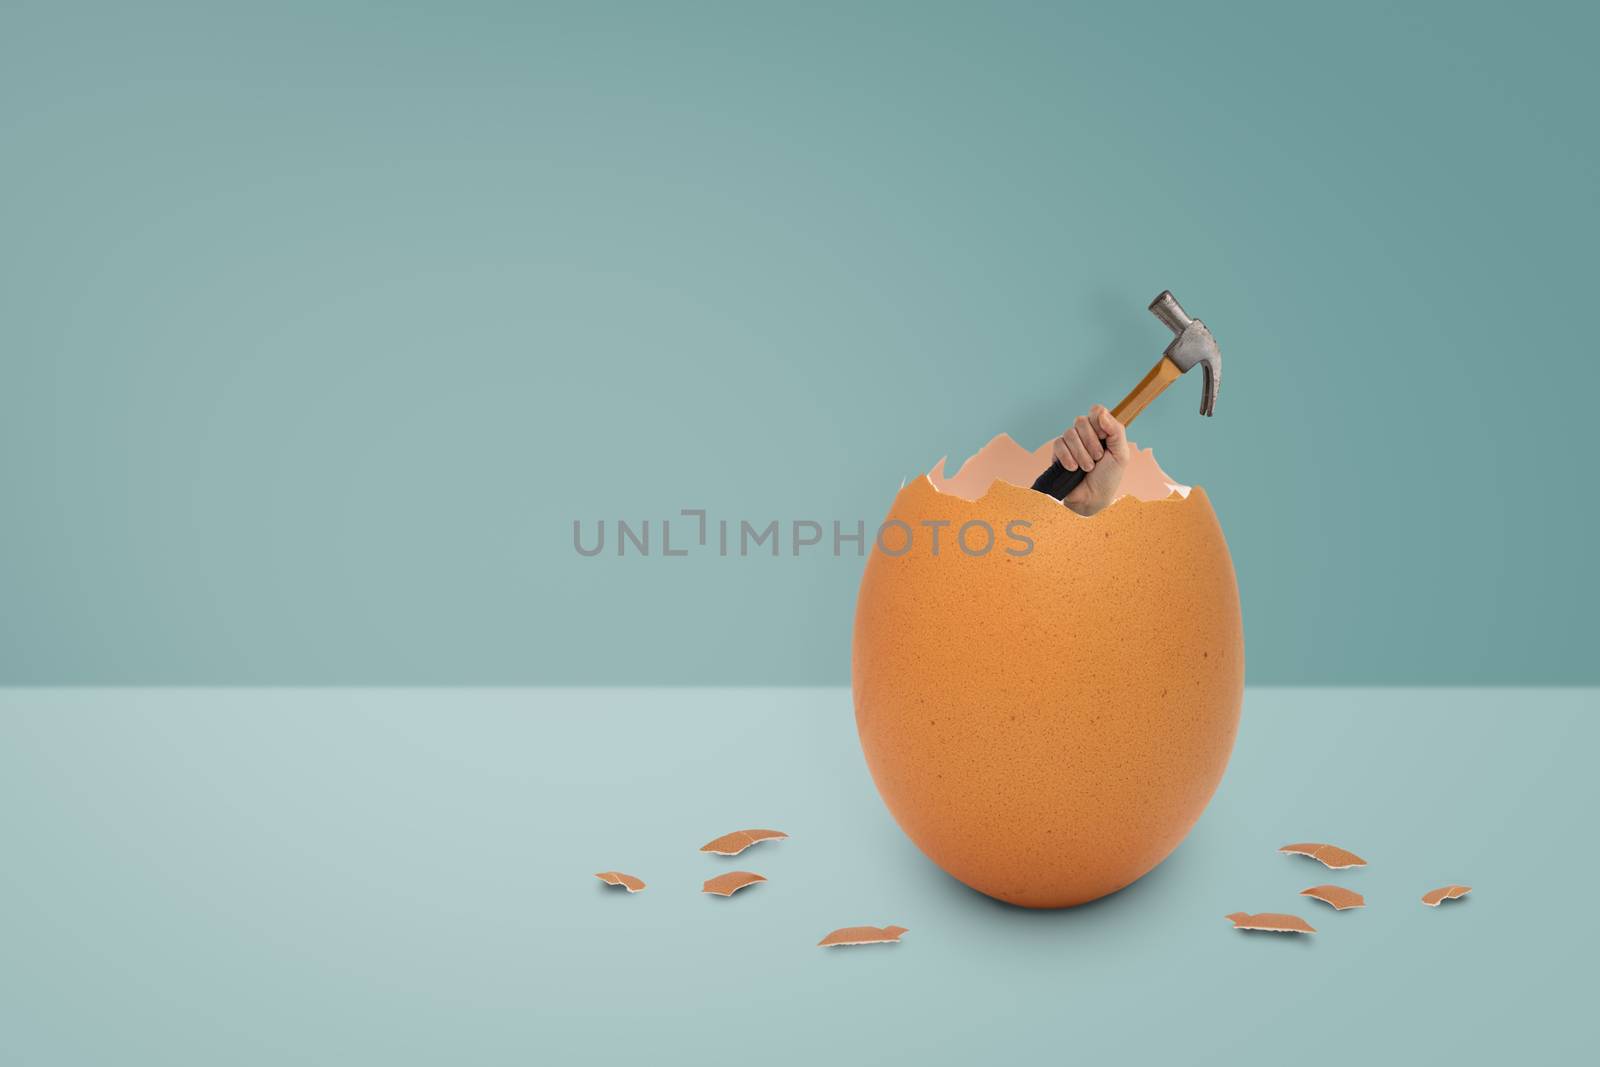 Holding the hammer out of the egg shell by feelartfeelant